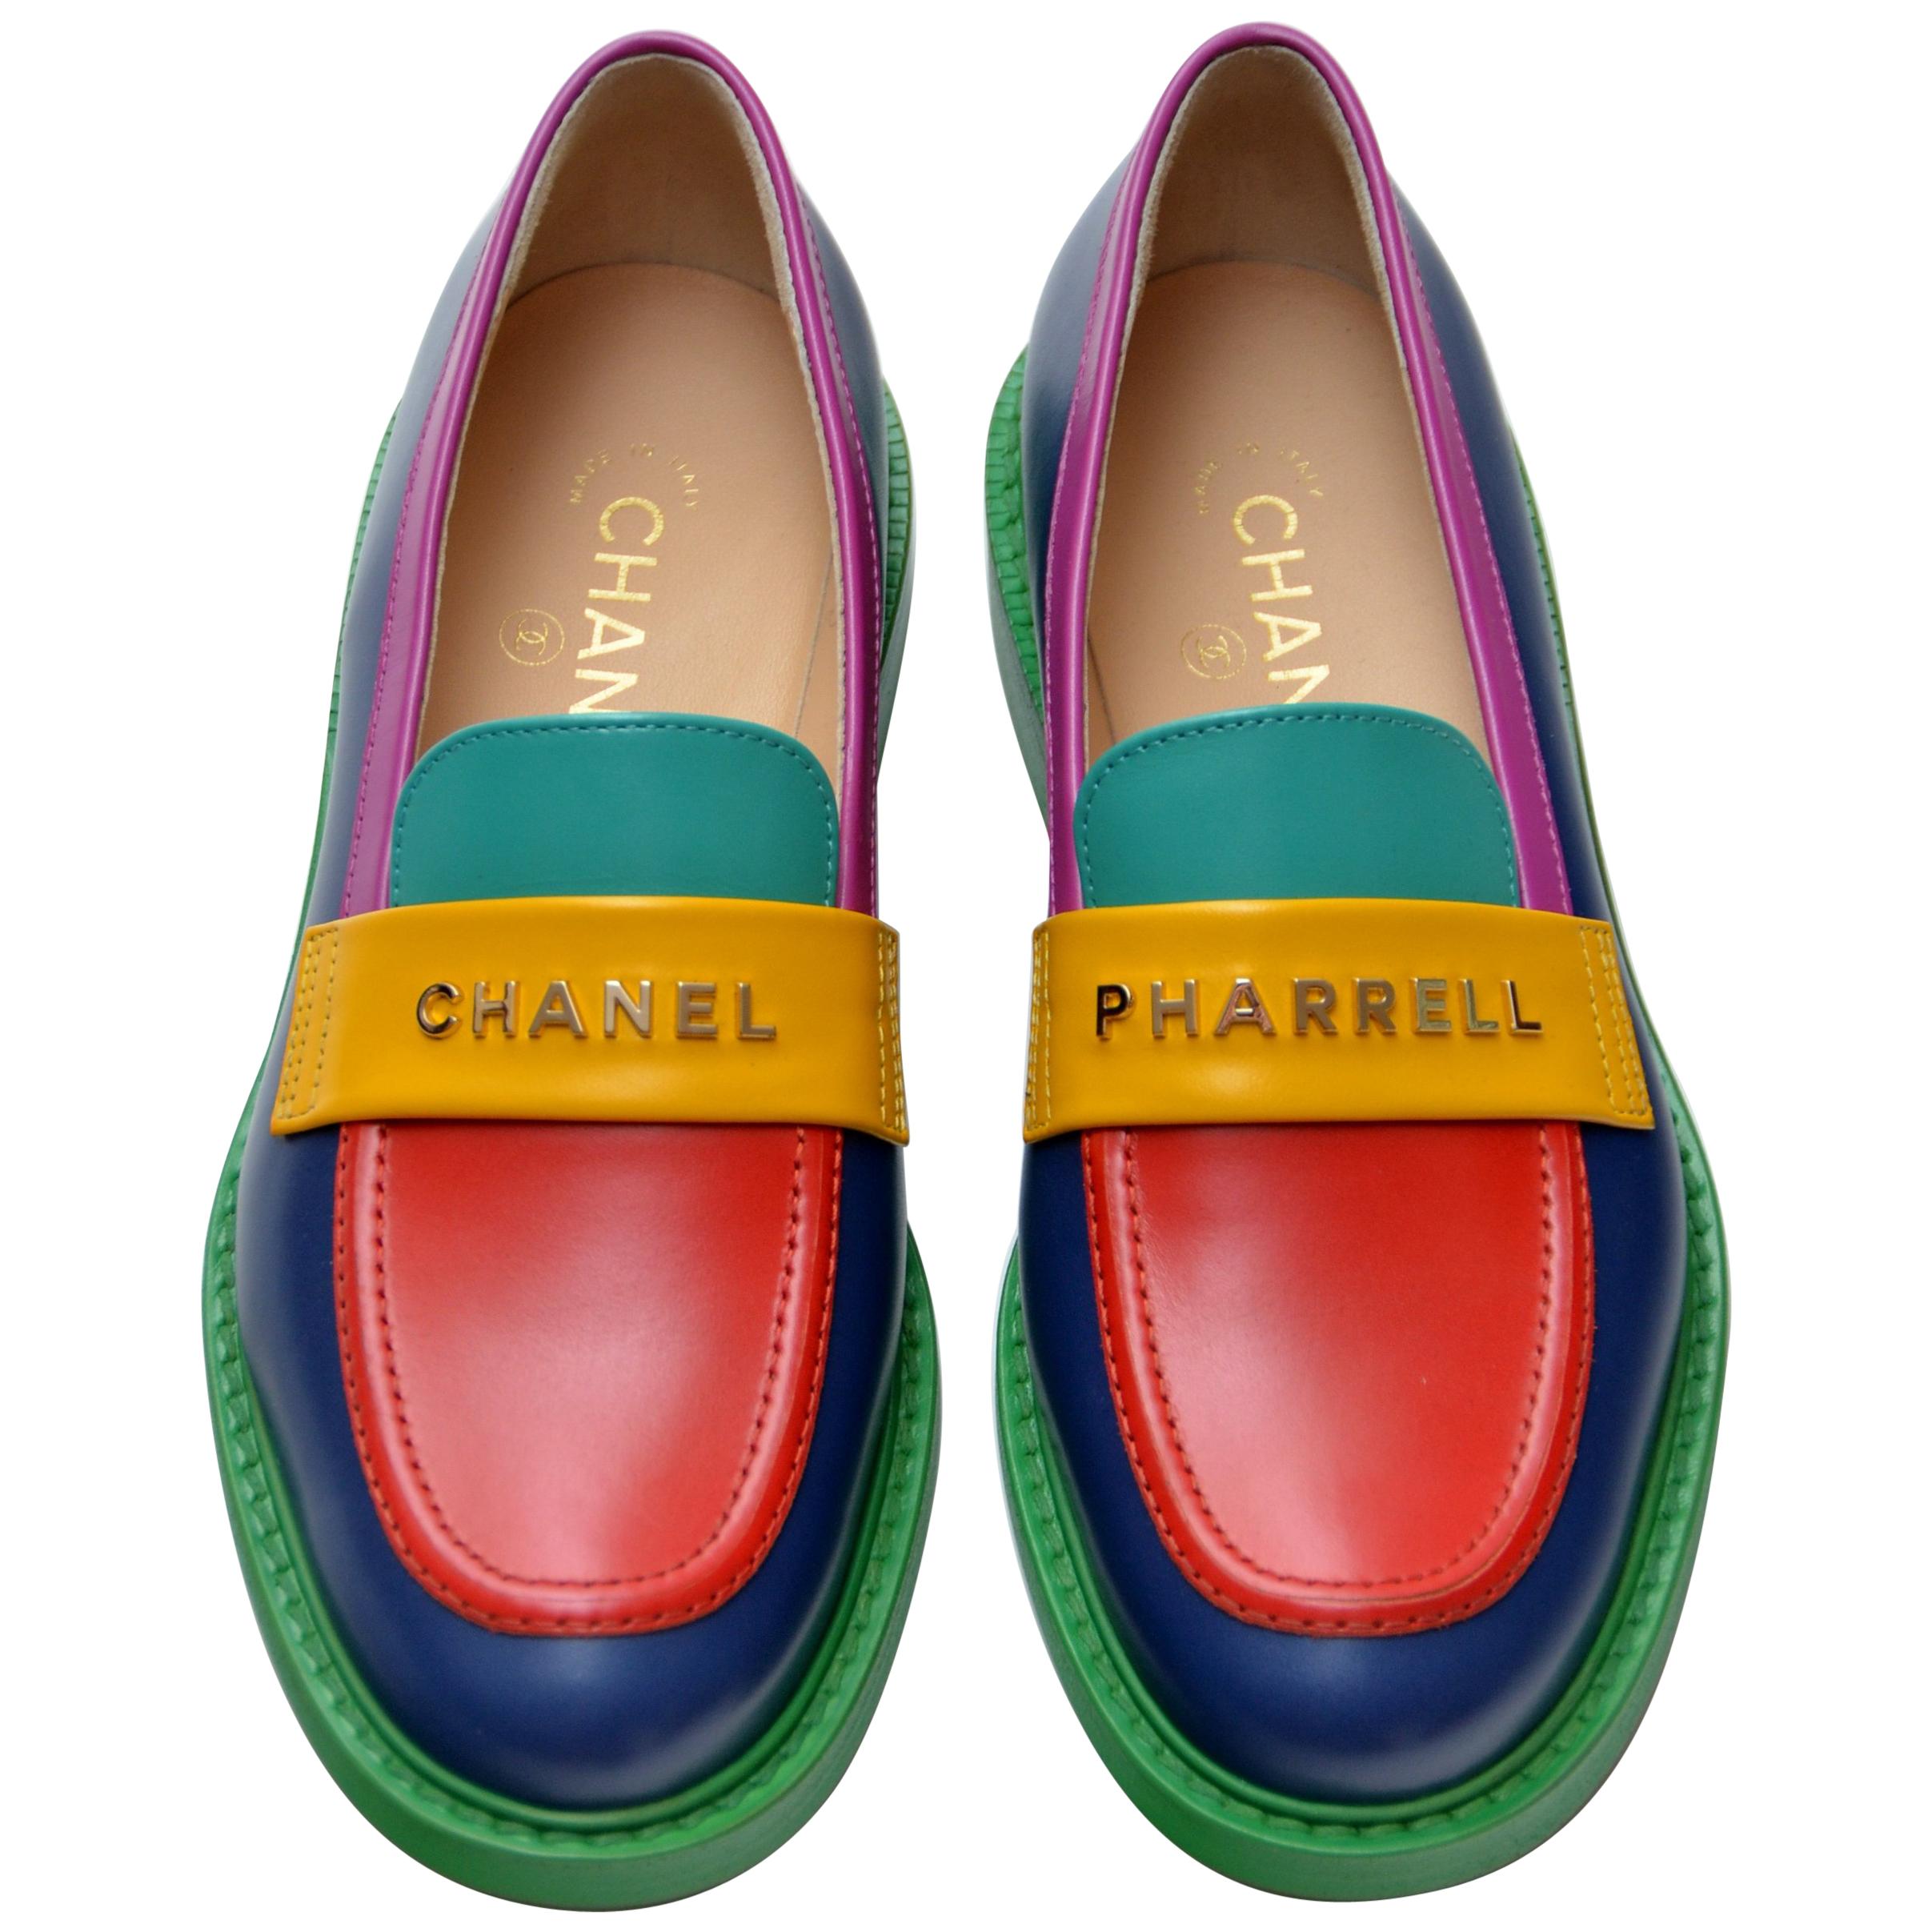 pharrell capsule collection